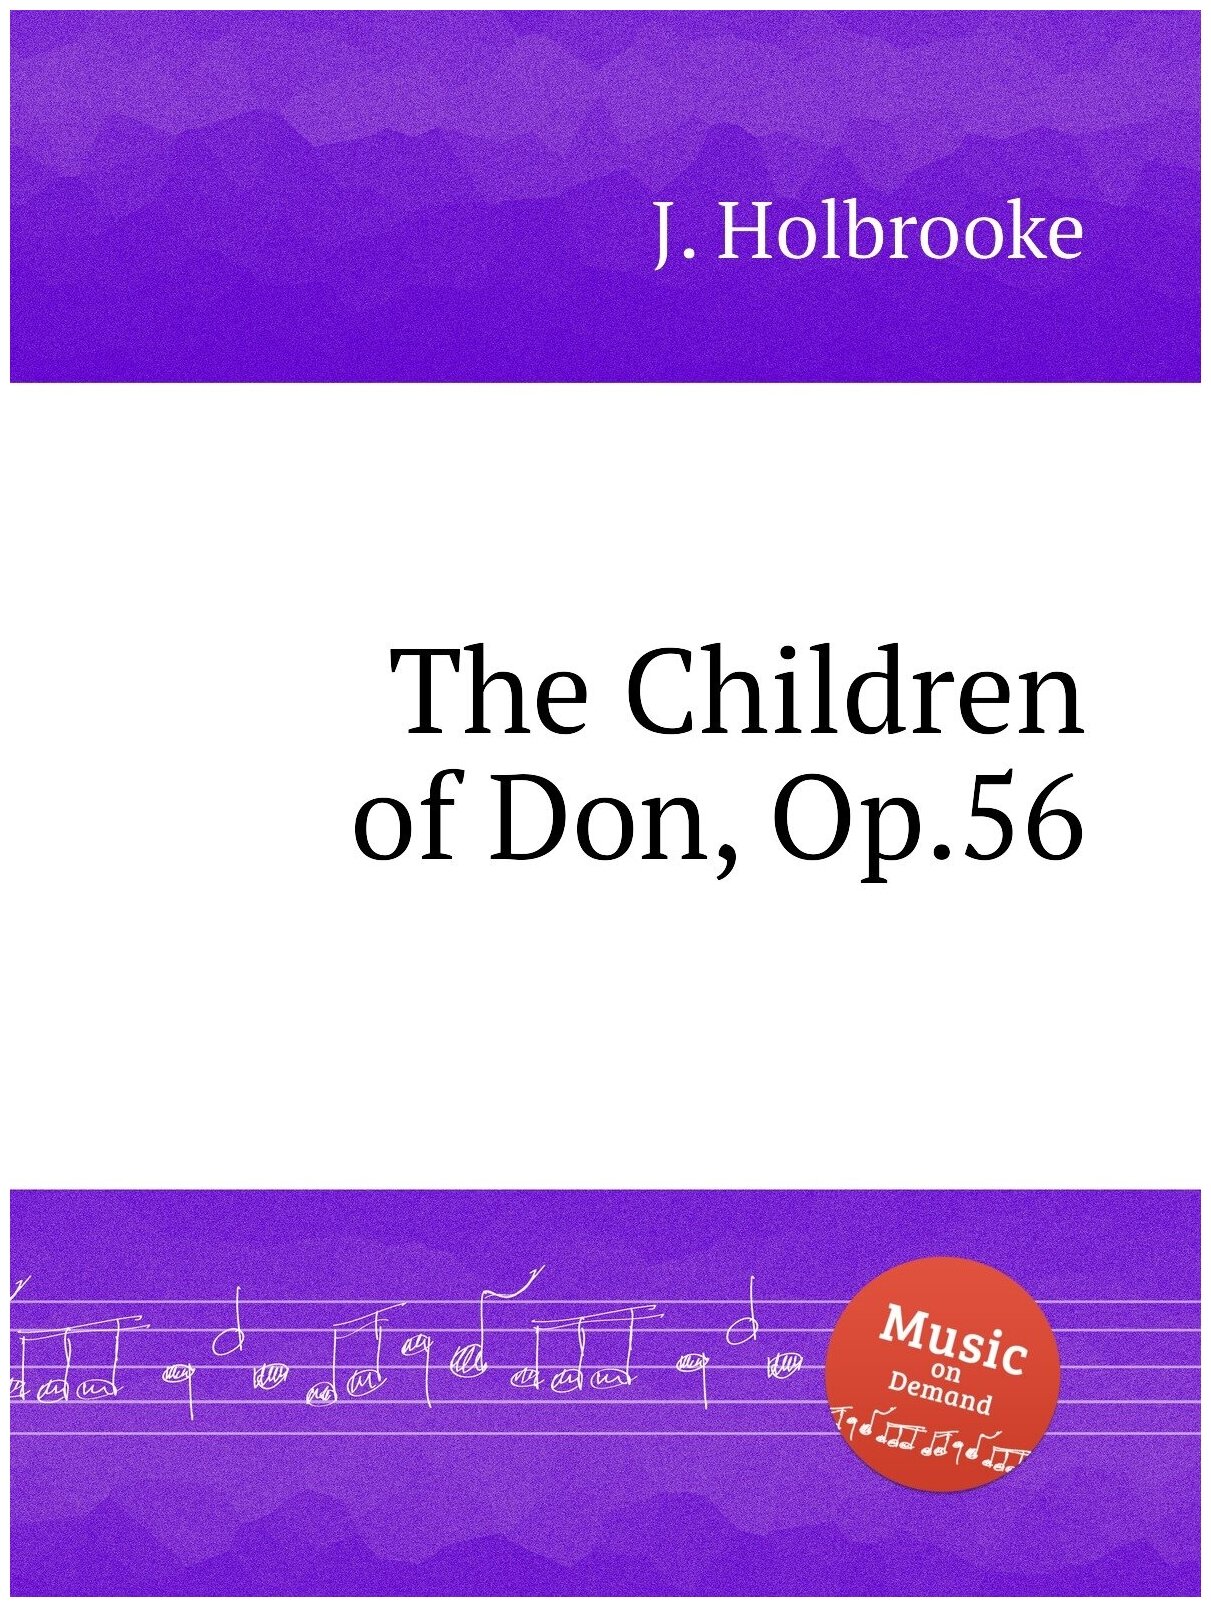 The Children of Don Op.56